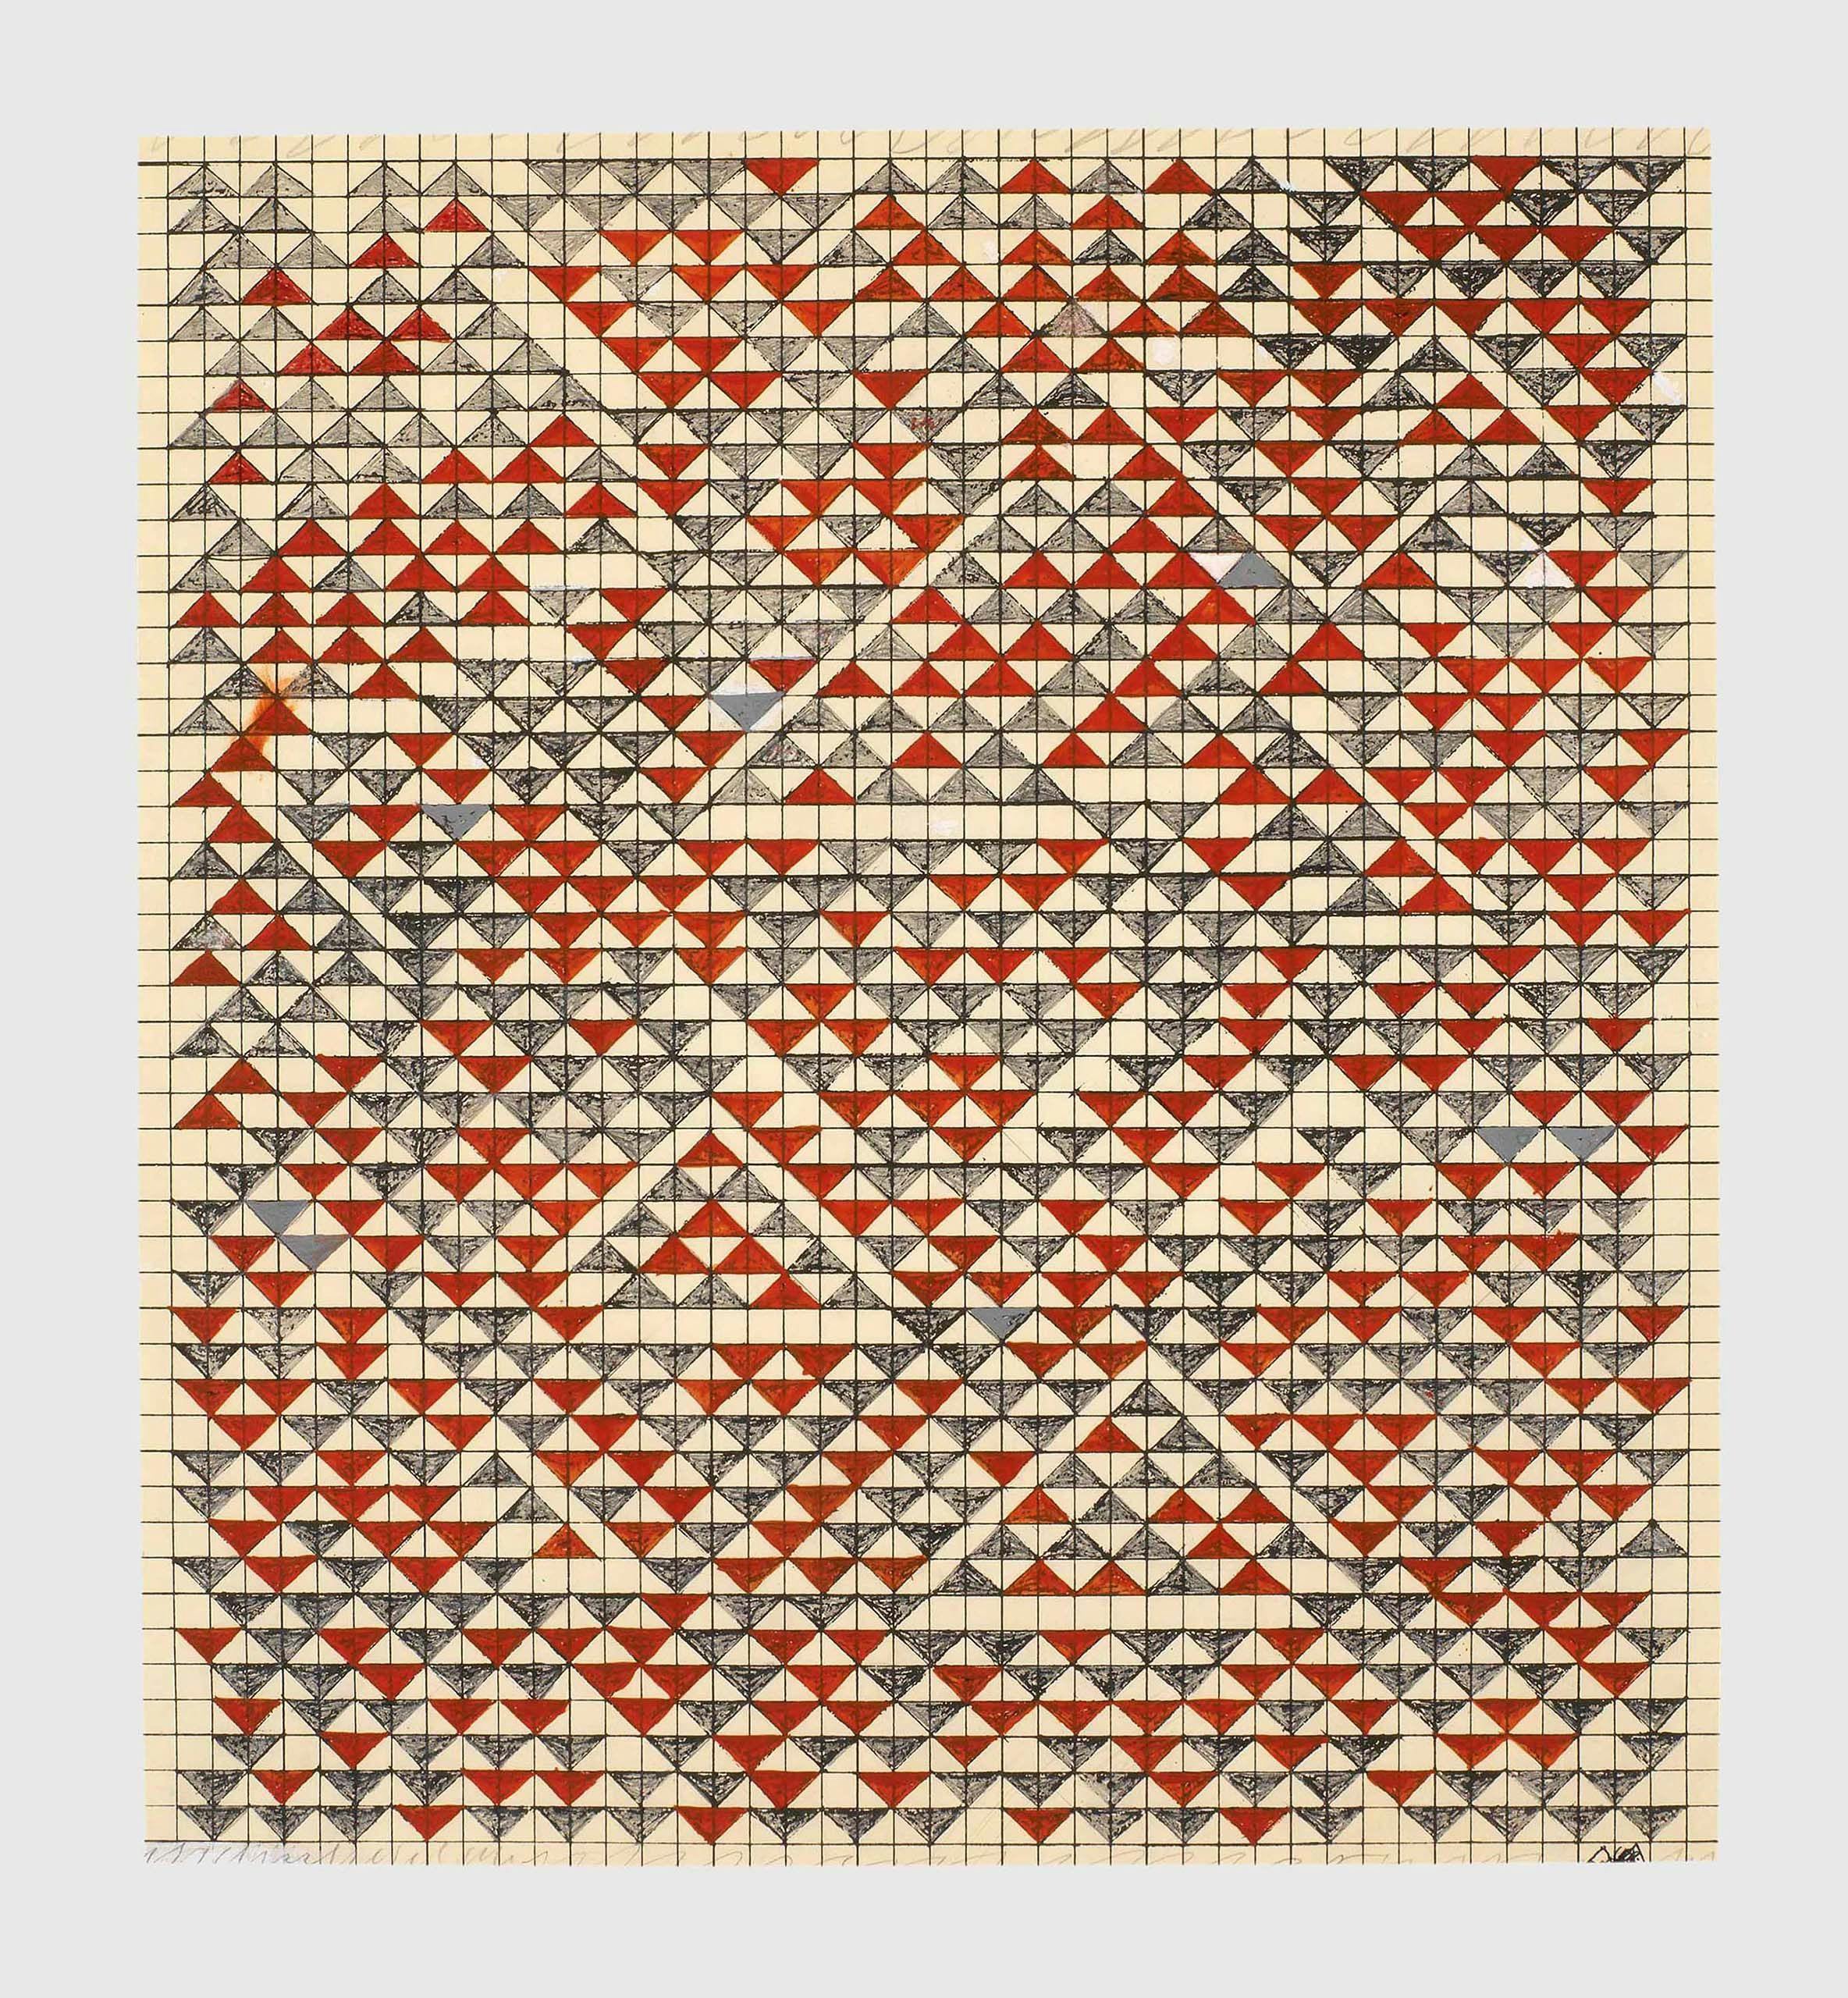 A drawing by Anni Albers, titled Study for Camino Real, dated 1967.